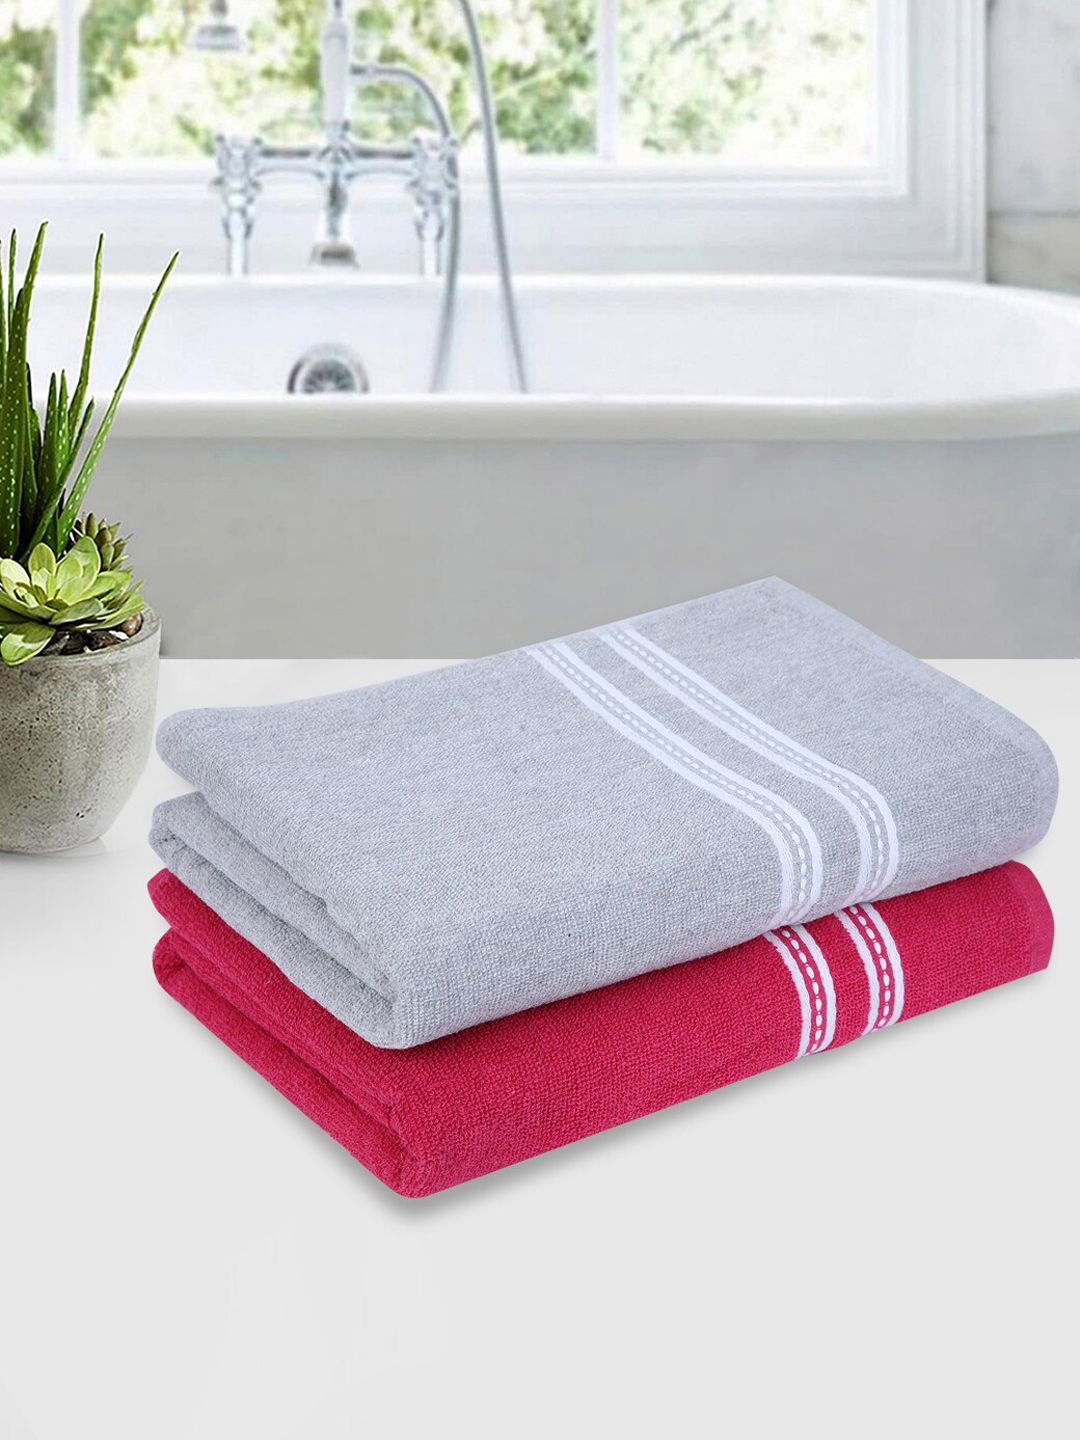 ROMEE Set Of 2 Pink & Silver Solid 500 GSM Cotton Bath Towels Price in India